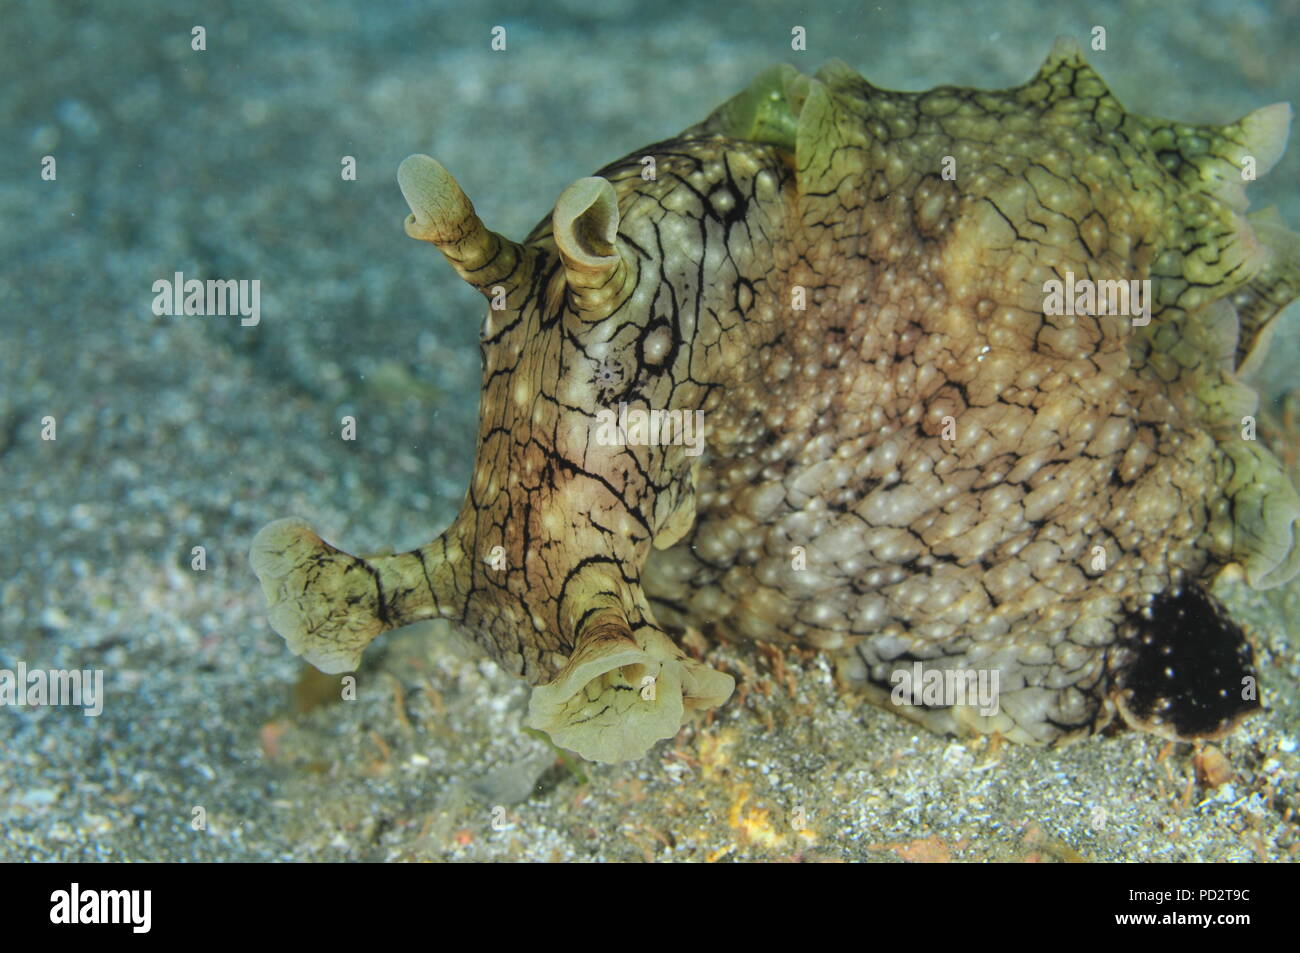 Front detail of probably spotted (variable) sea hare Aplysia dactylomela on flat sandy bottom. Stock Photo